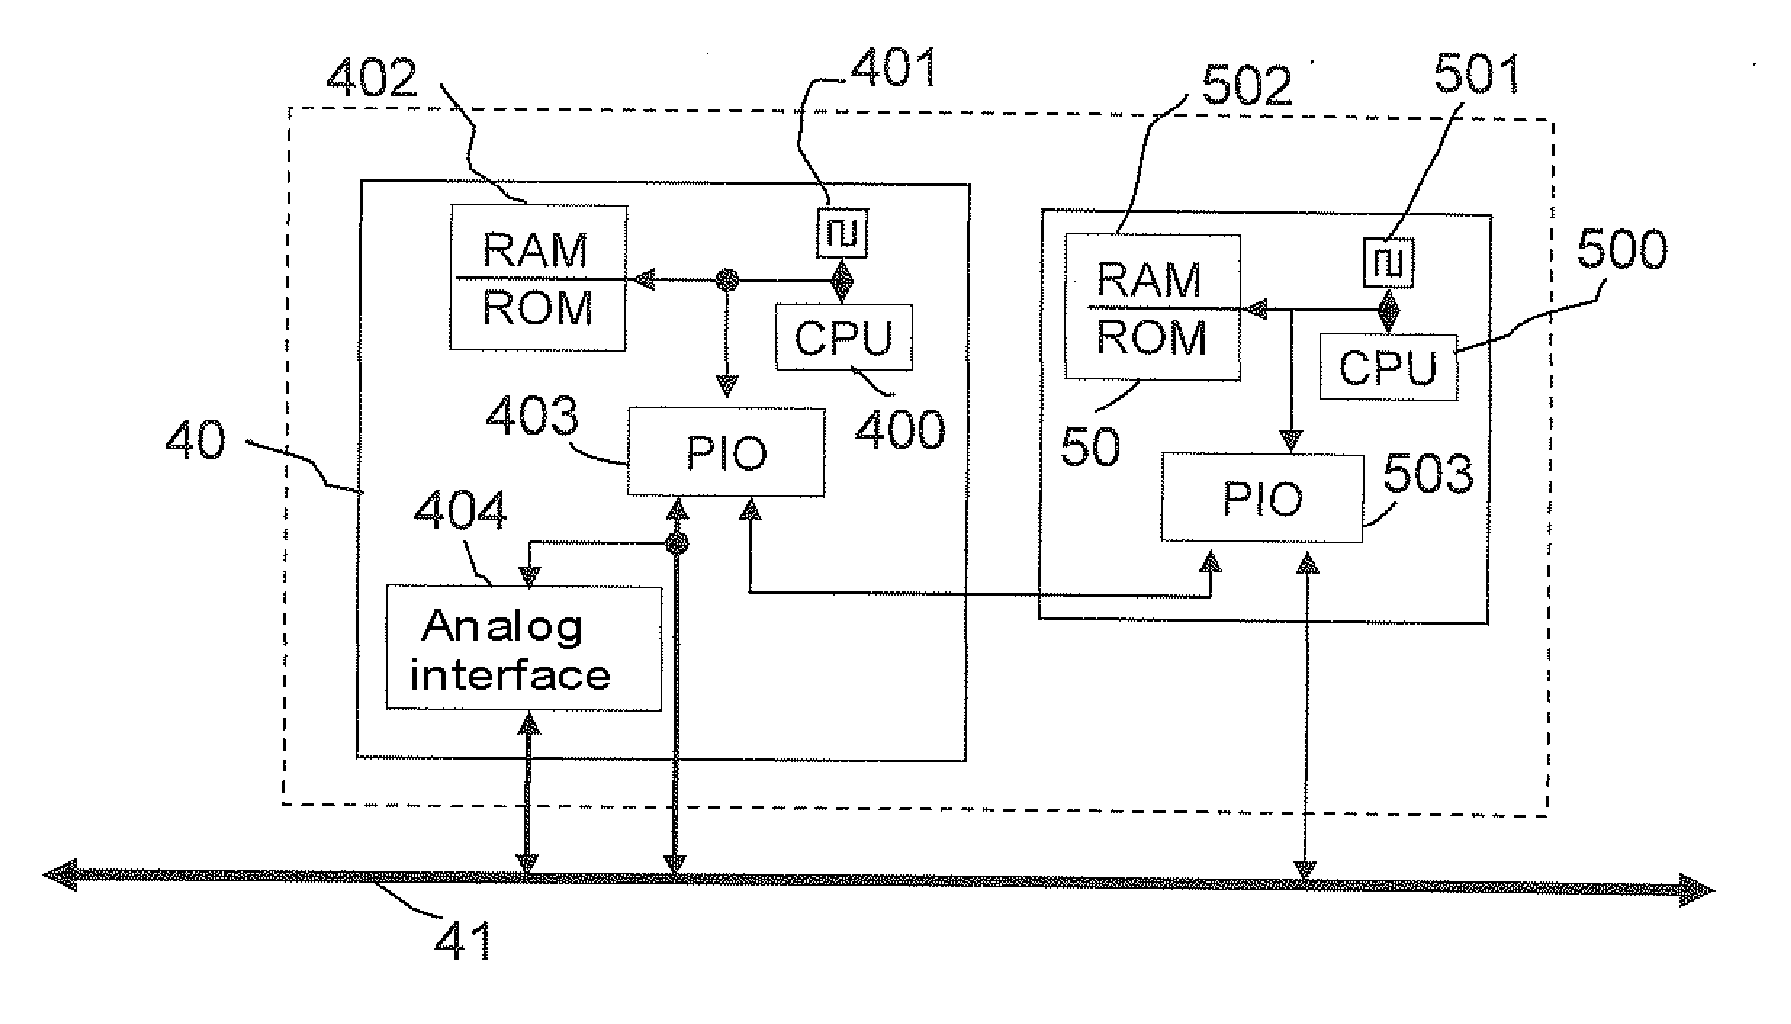 Method of Monitoring the Correct Operation of a Computer